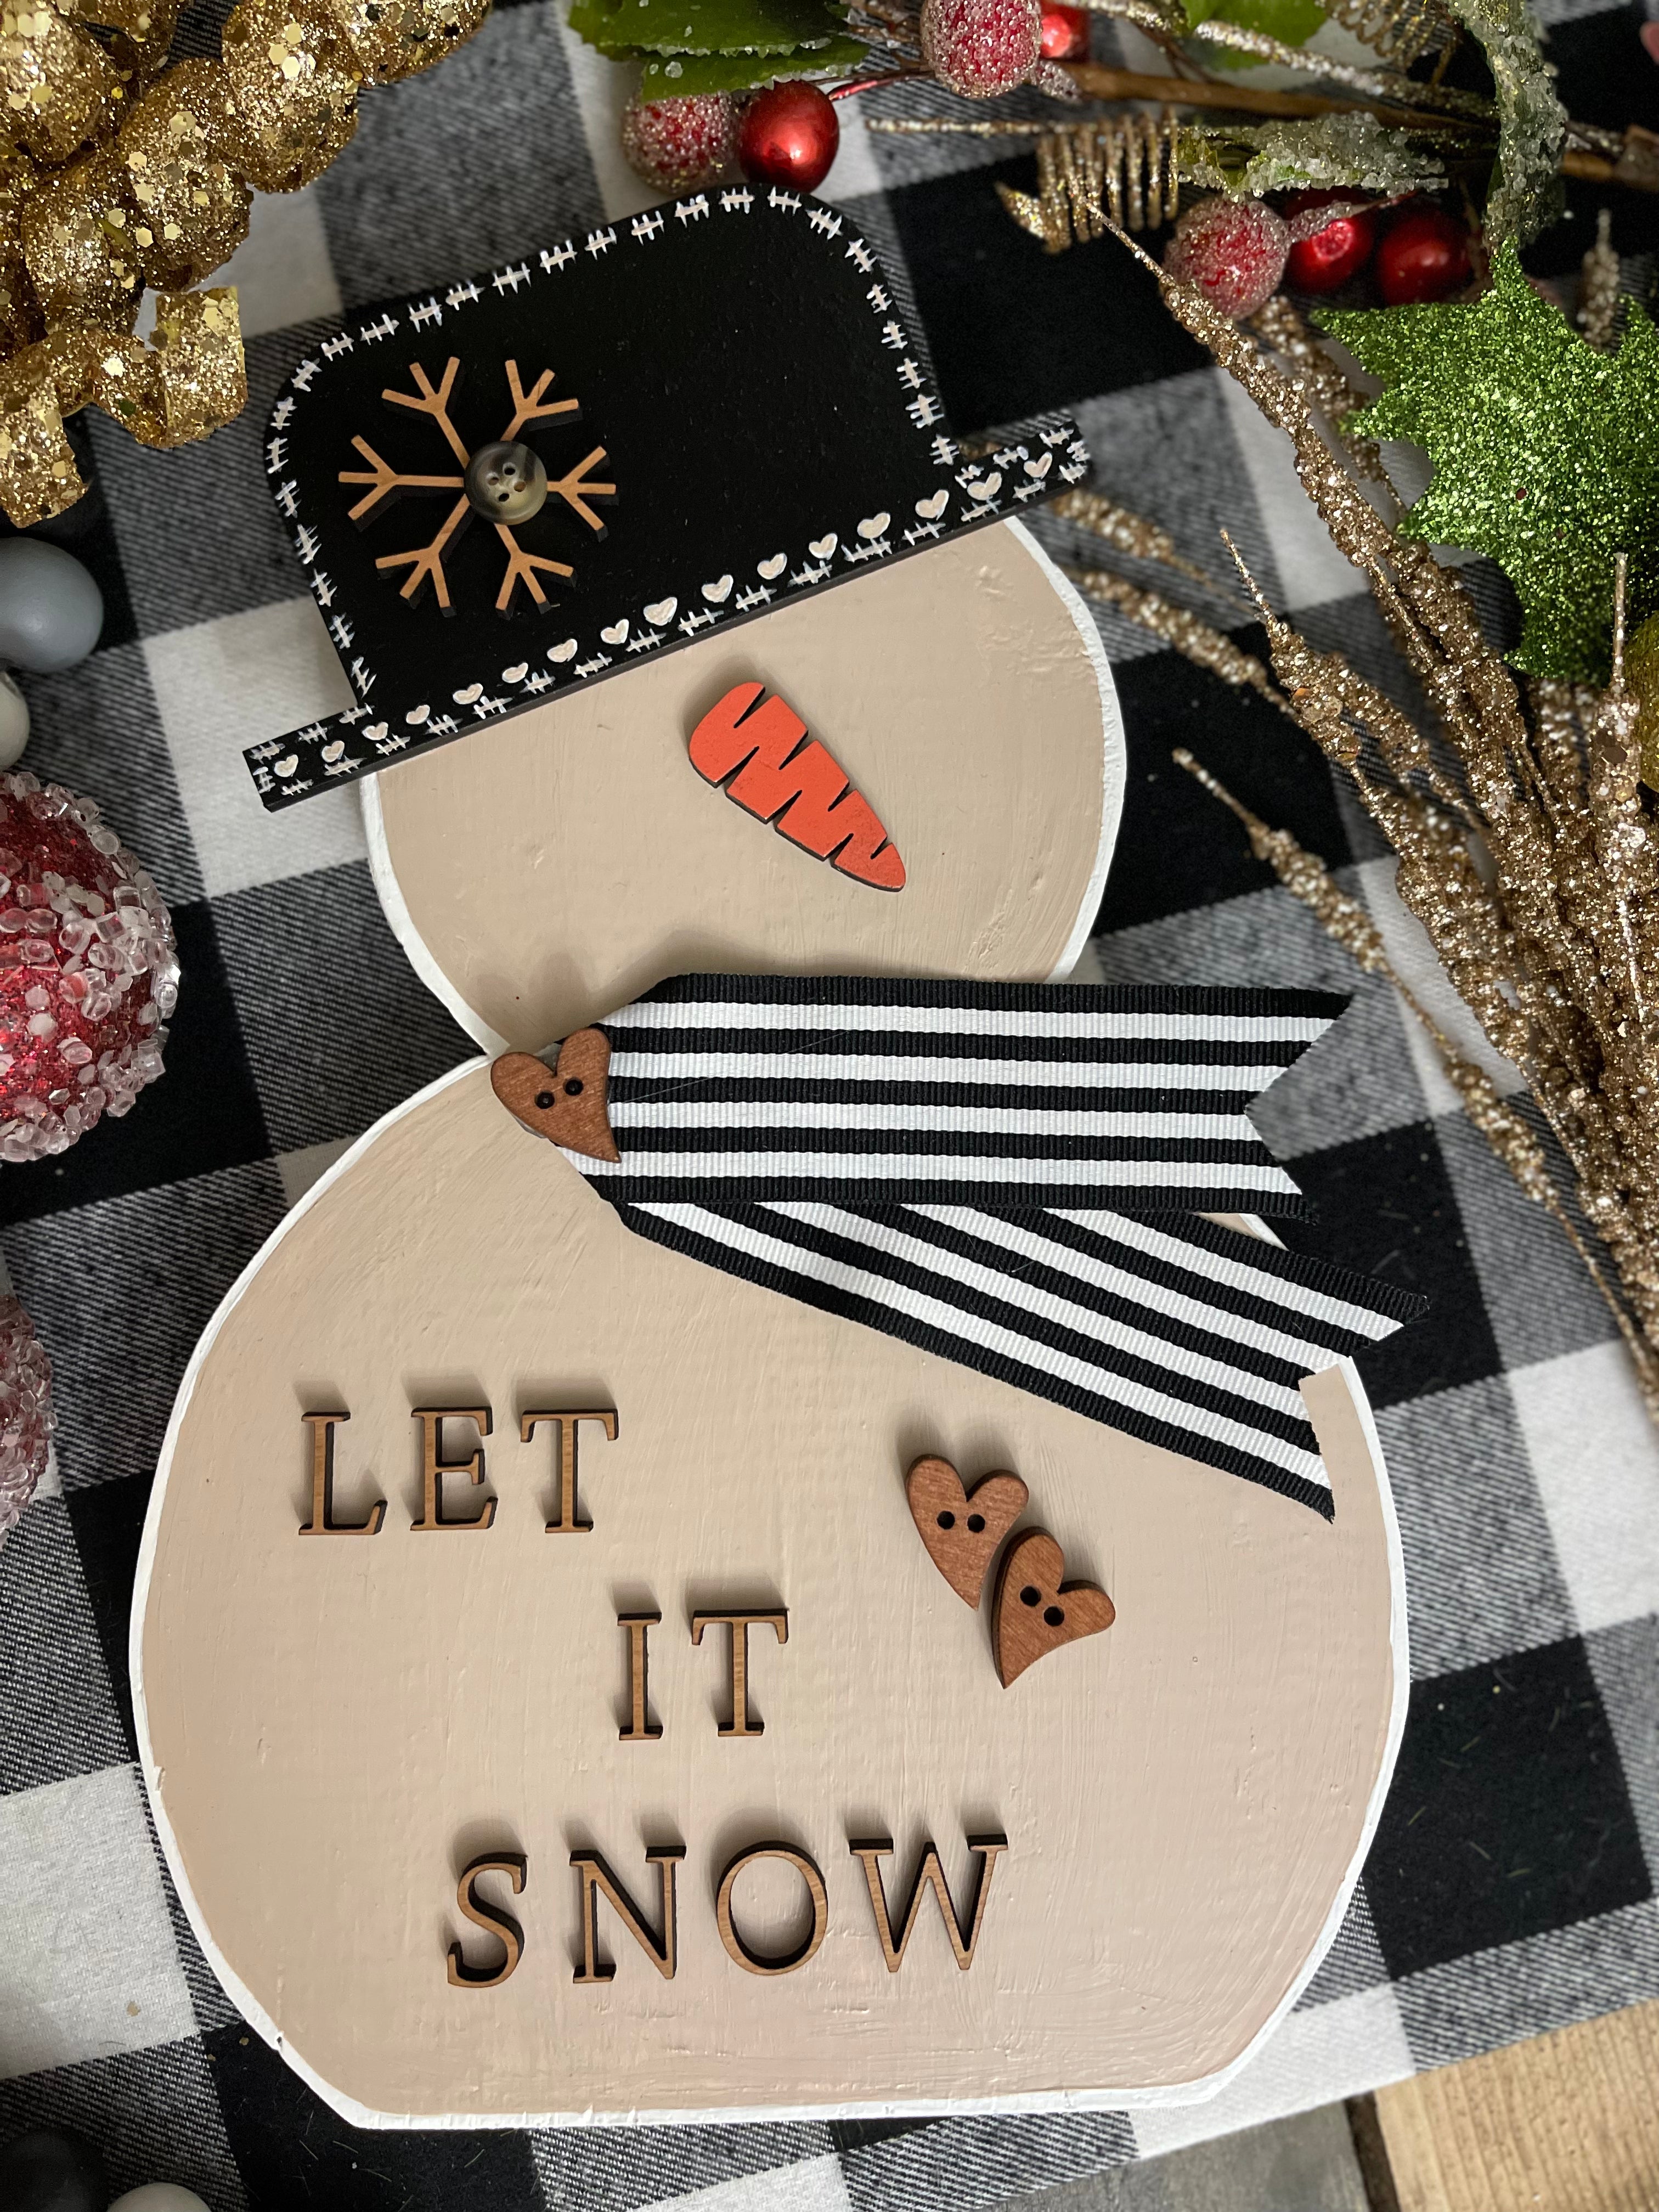 This is the large tan snowman with the saying let it snow in print.